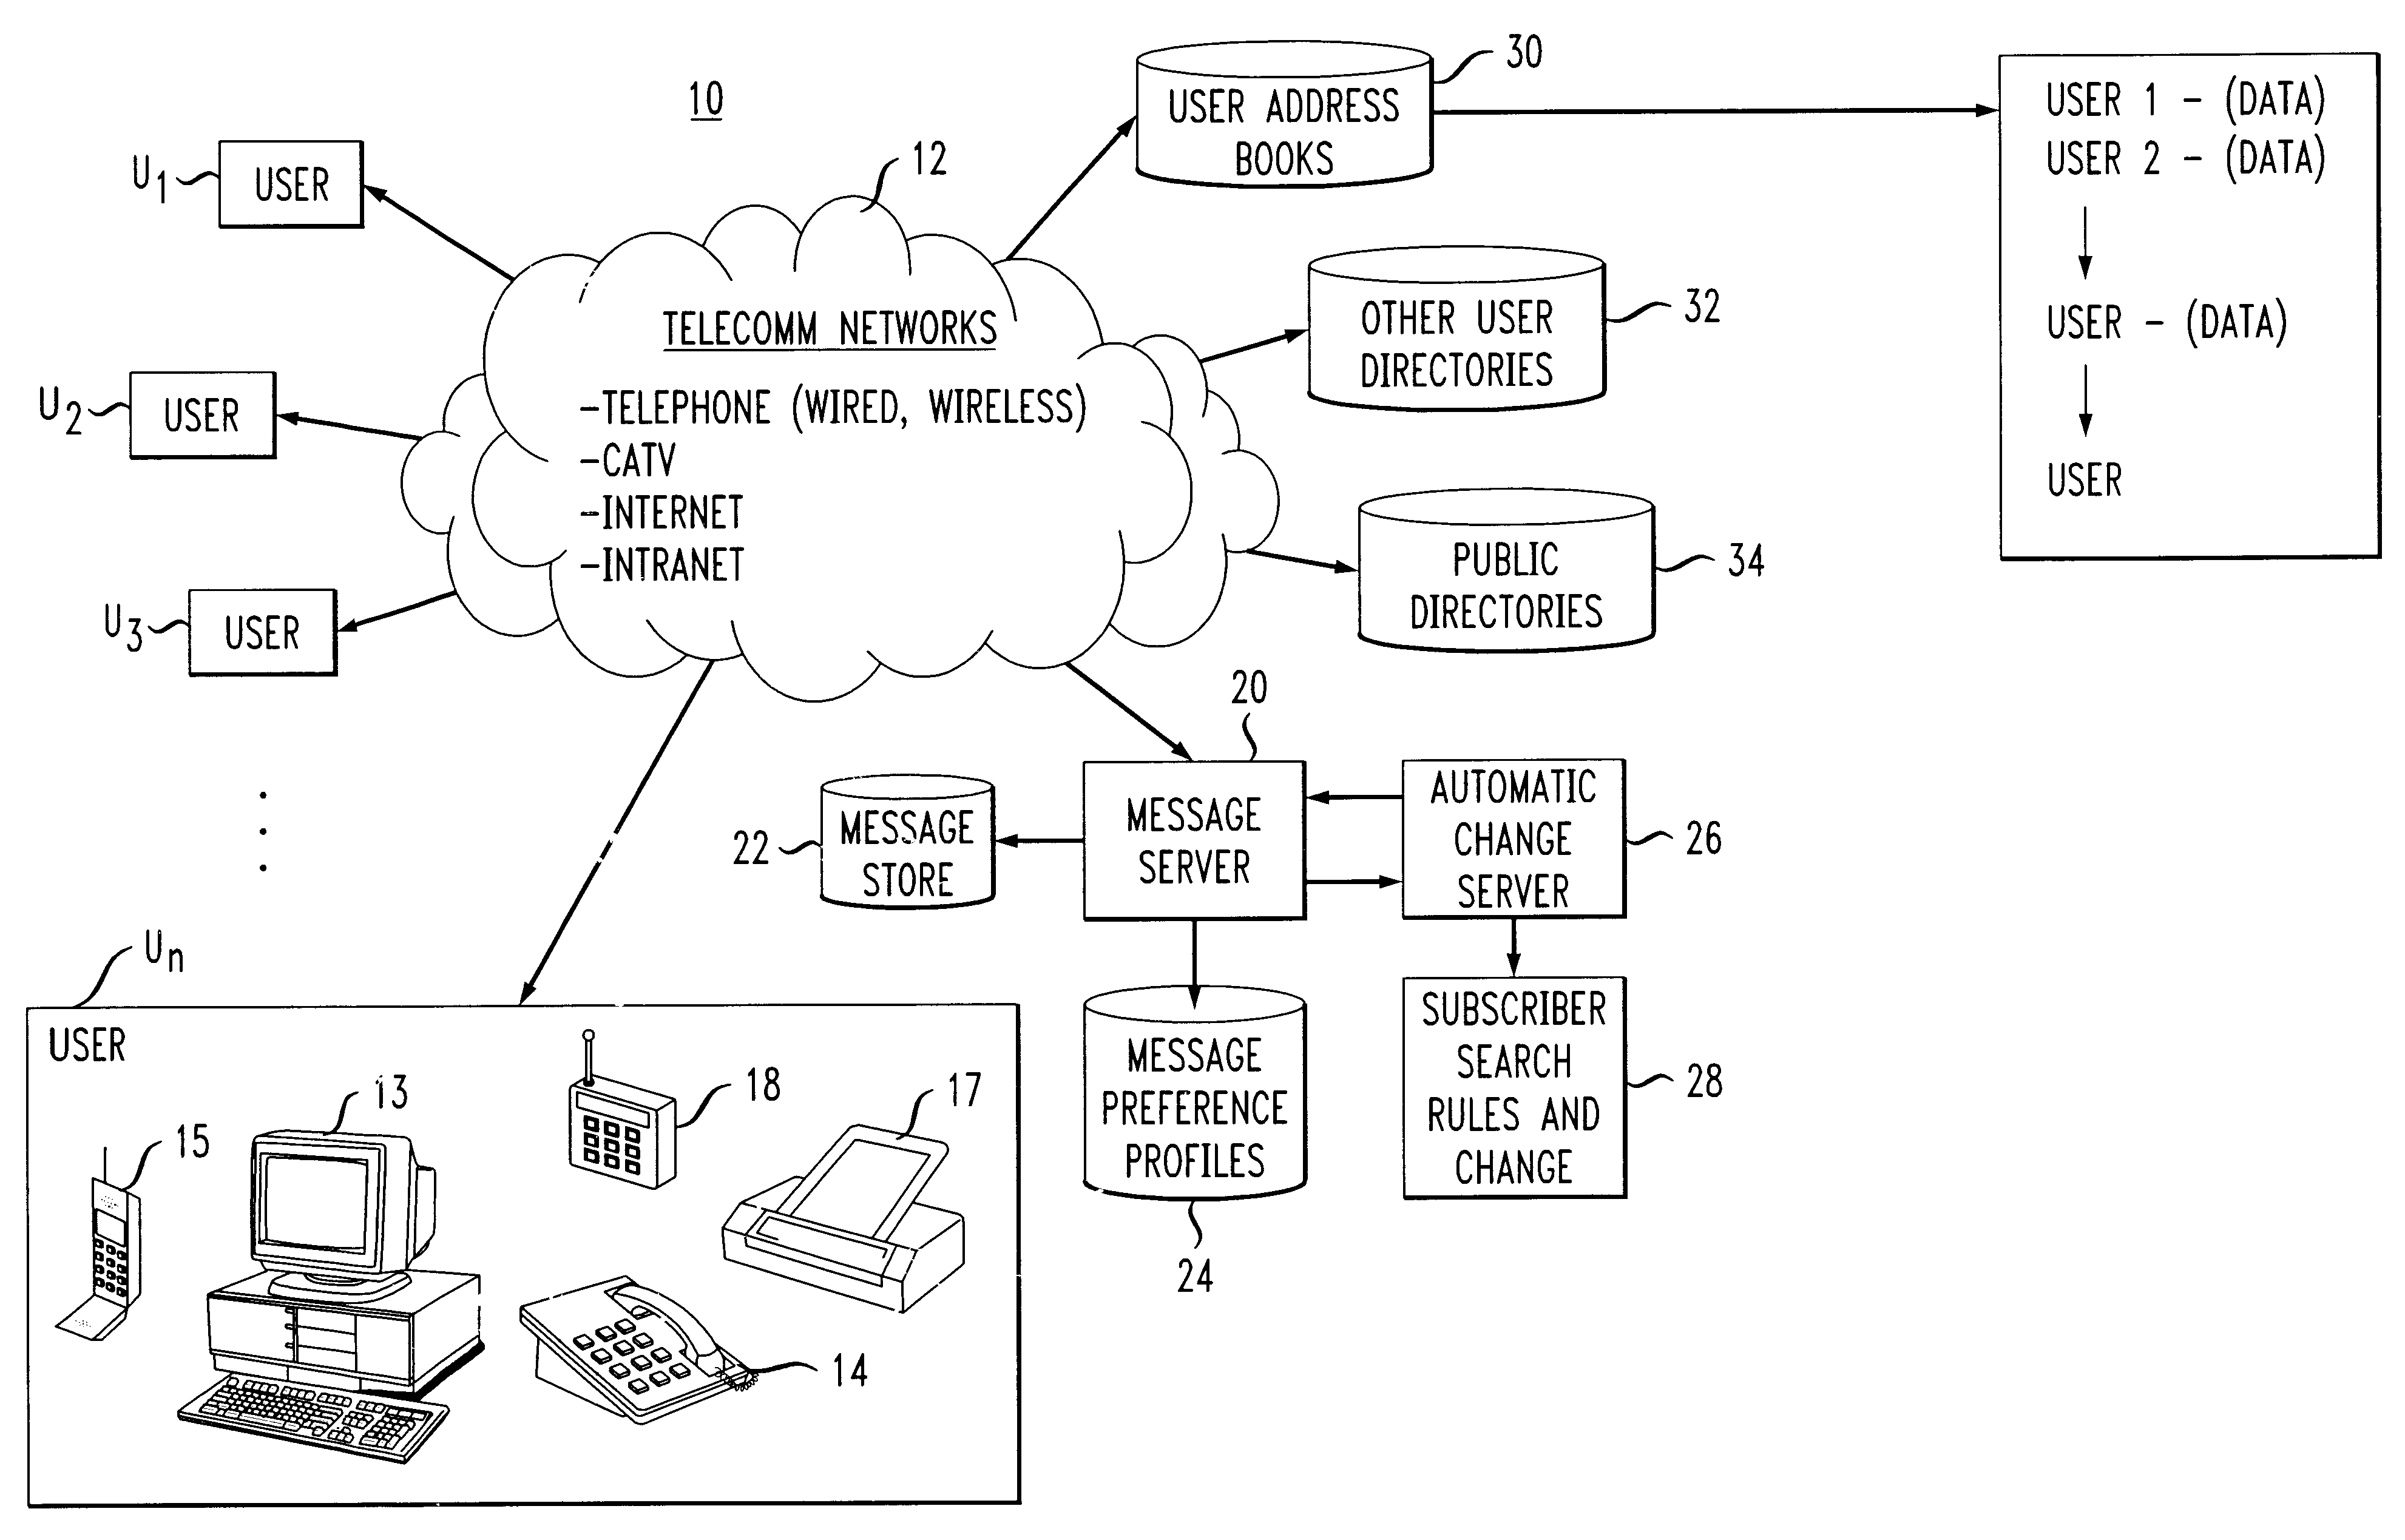 System, apparatus and method for automatic address updating of outgoing and incoming user messages in a communications network